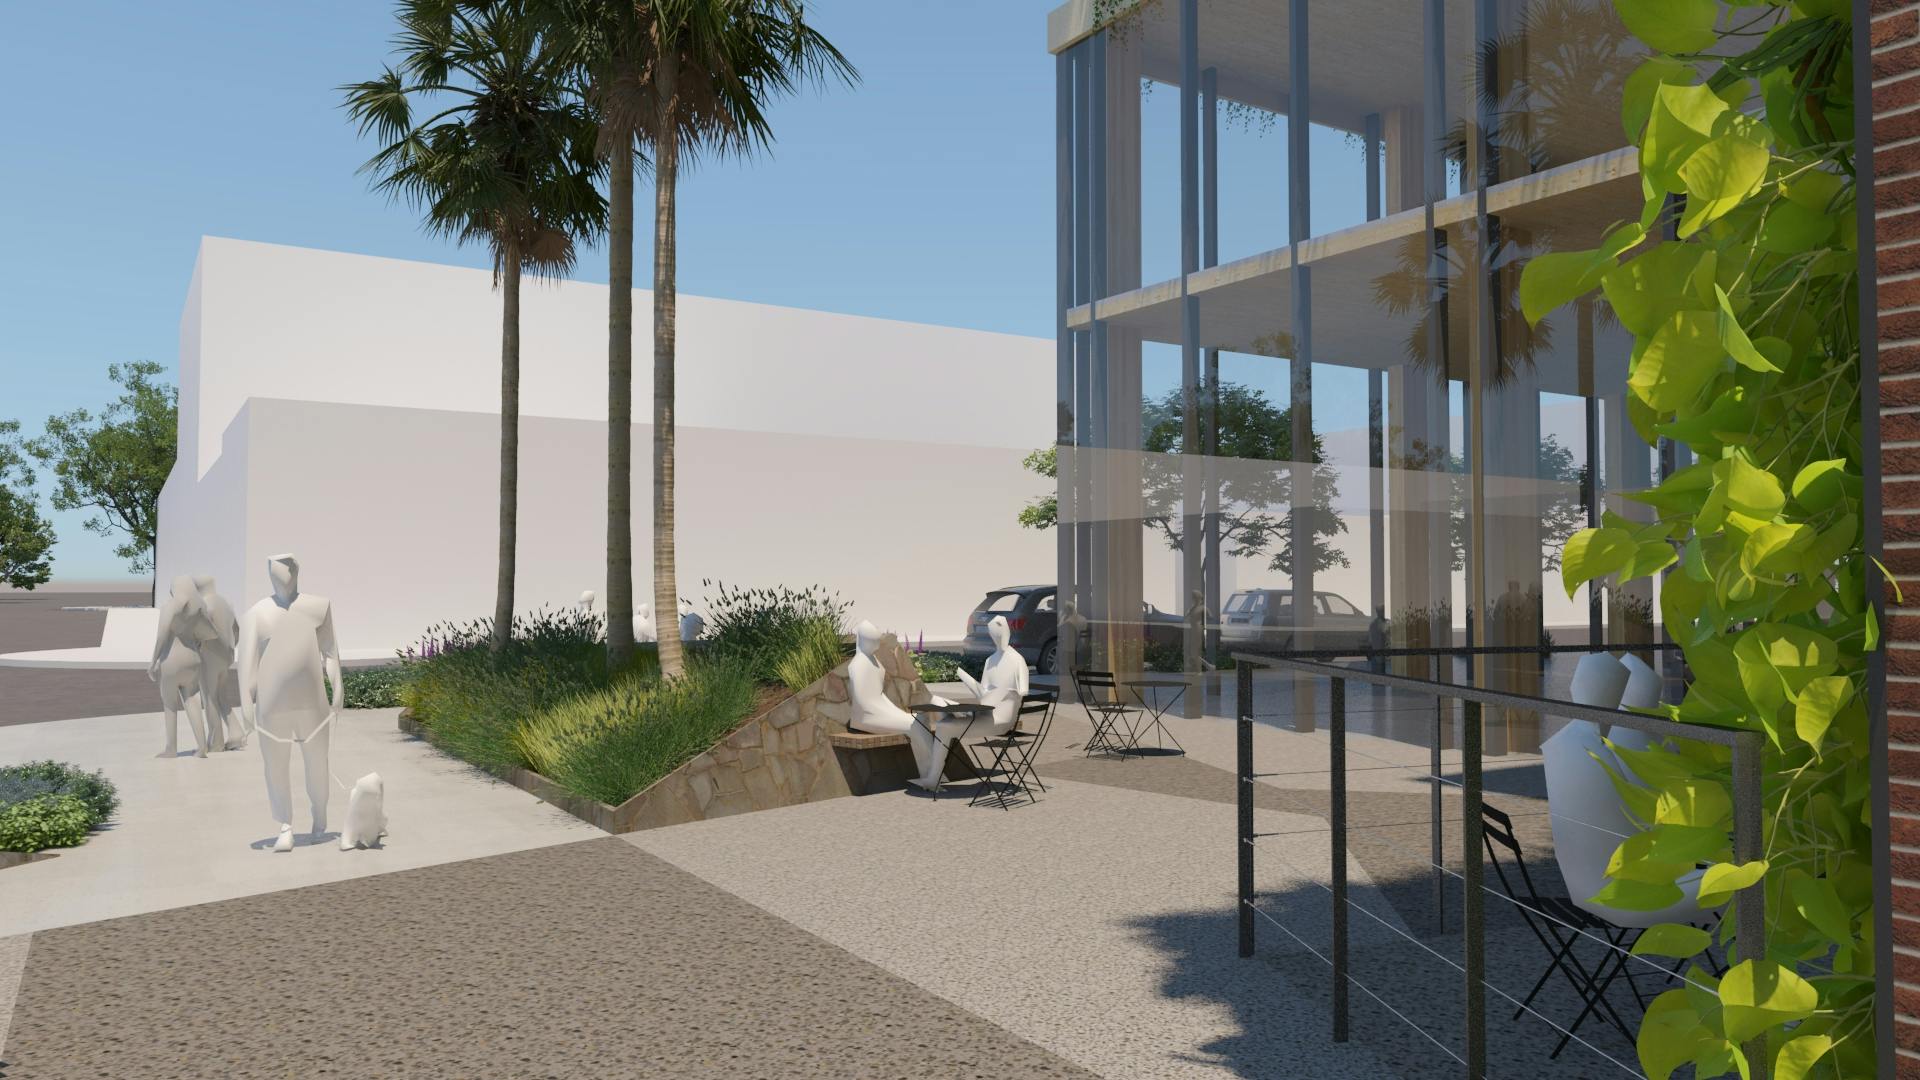 render of people sitting at a coffee table and walking pets near 4th and B (Bespoke) building